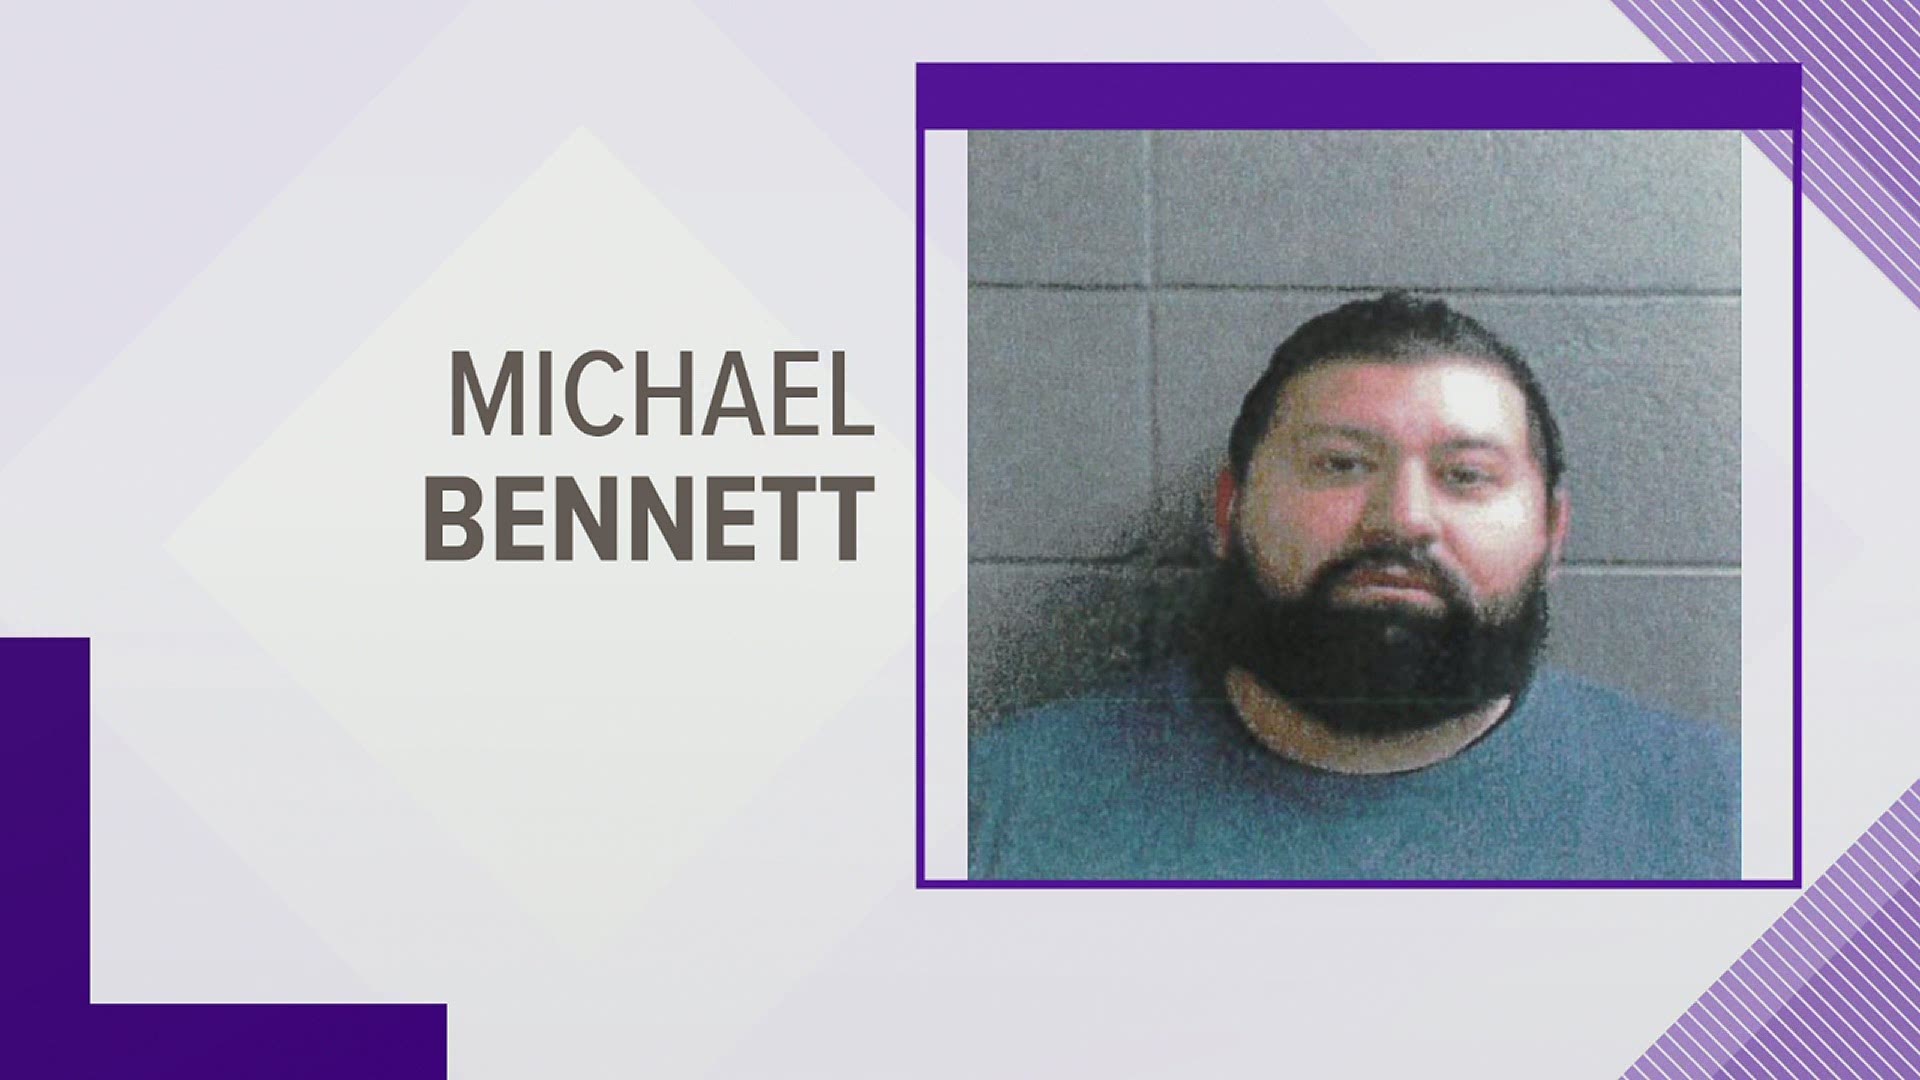 Sterling Police are searching for Michael Bennett, who is a suspect in a shooting in Sterling that killed one man Saturday evening.